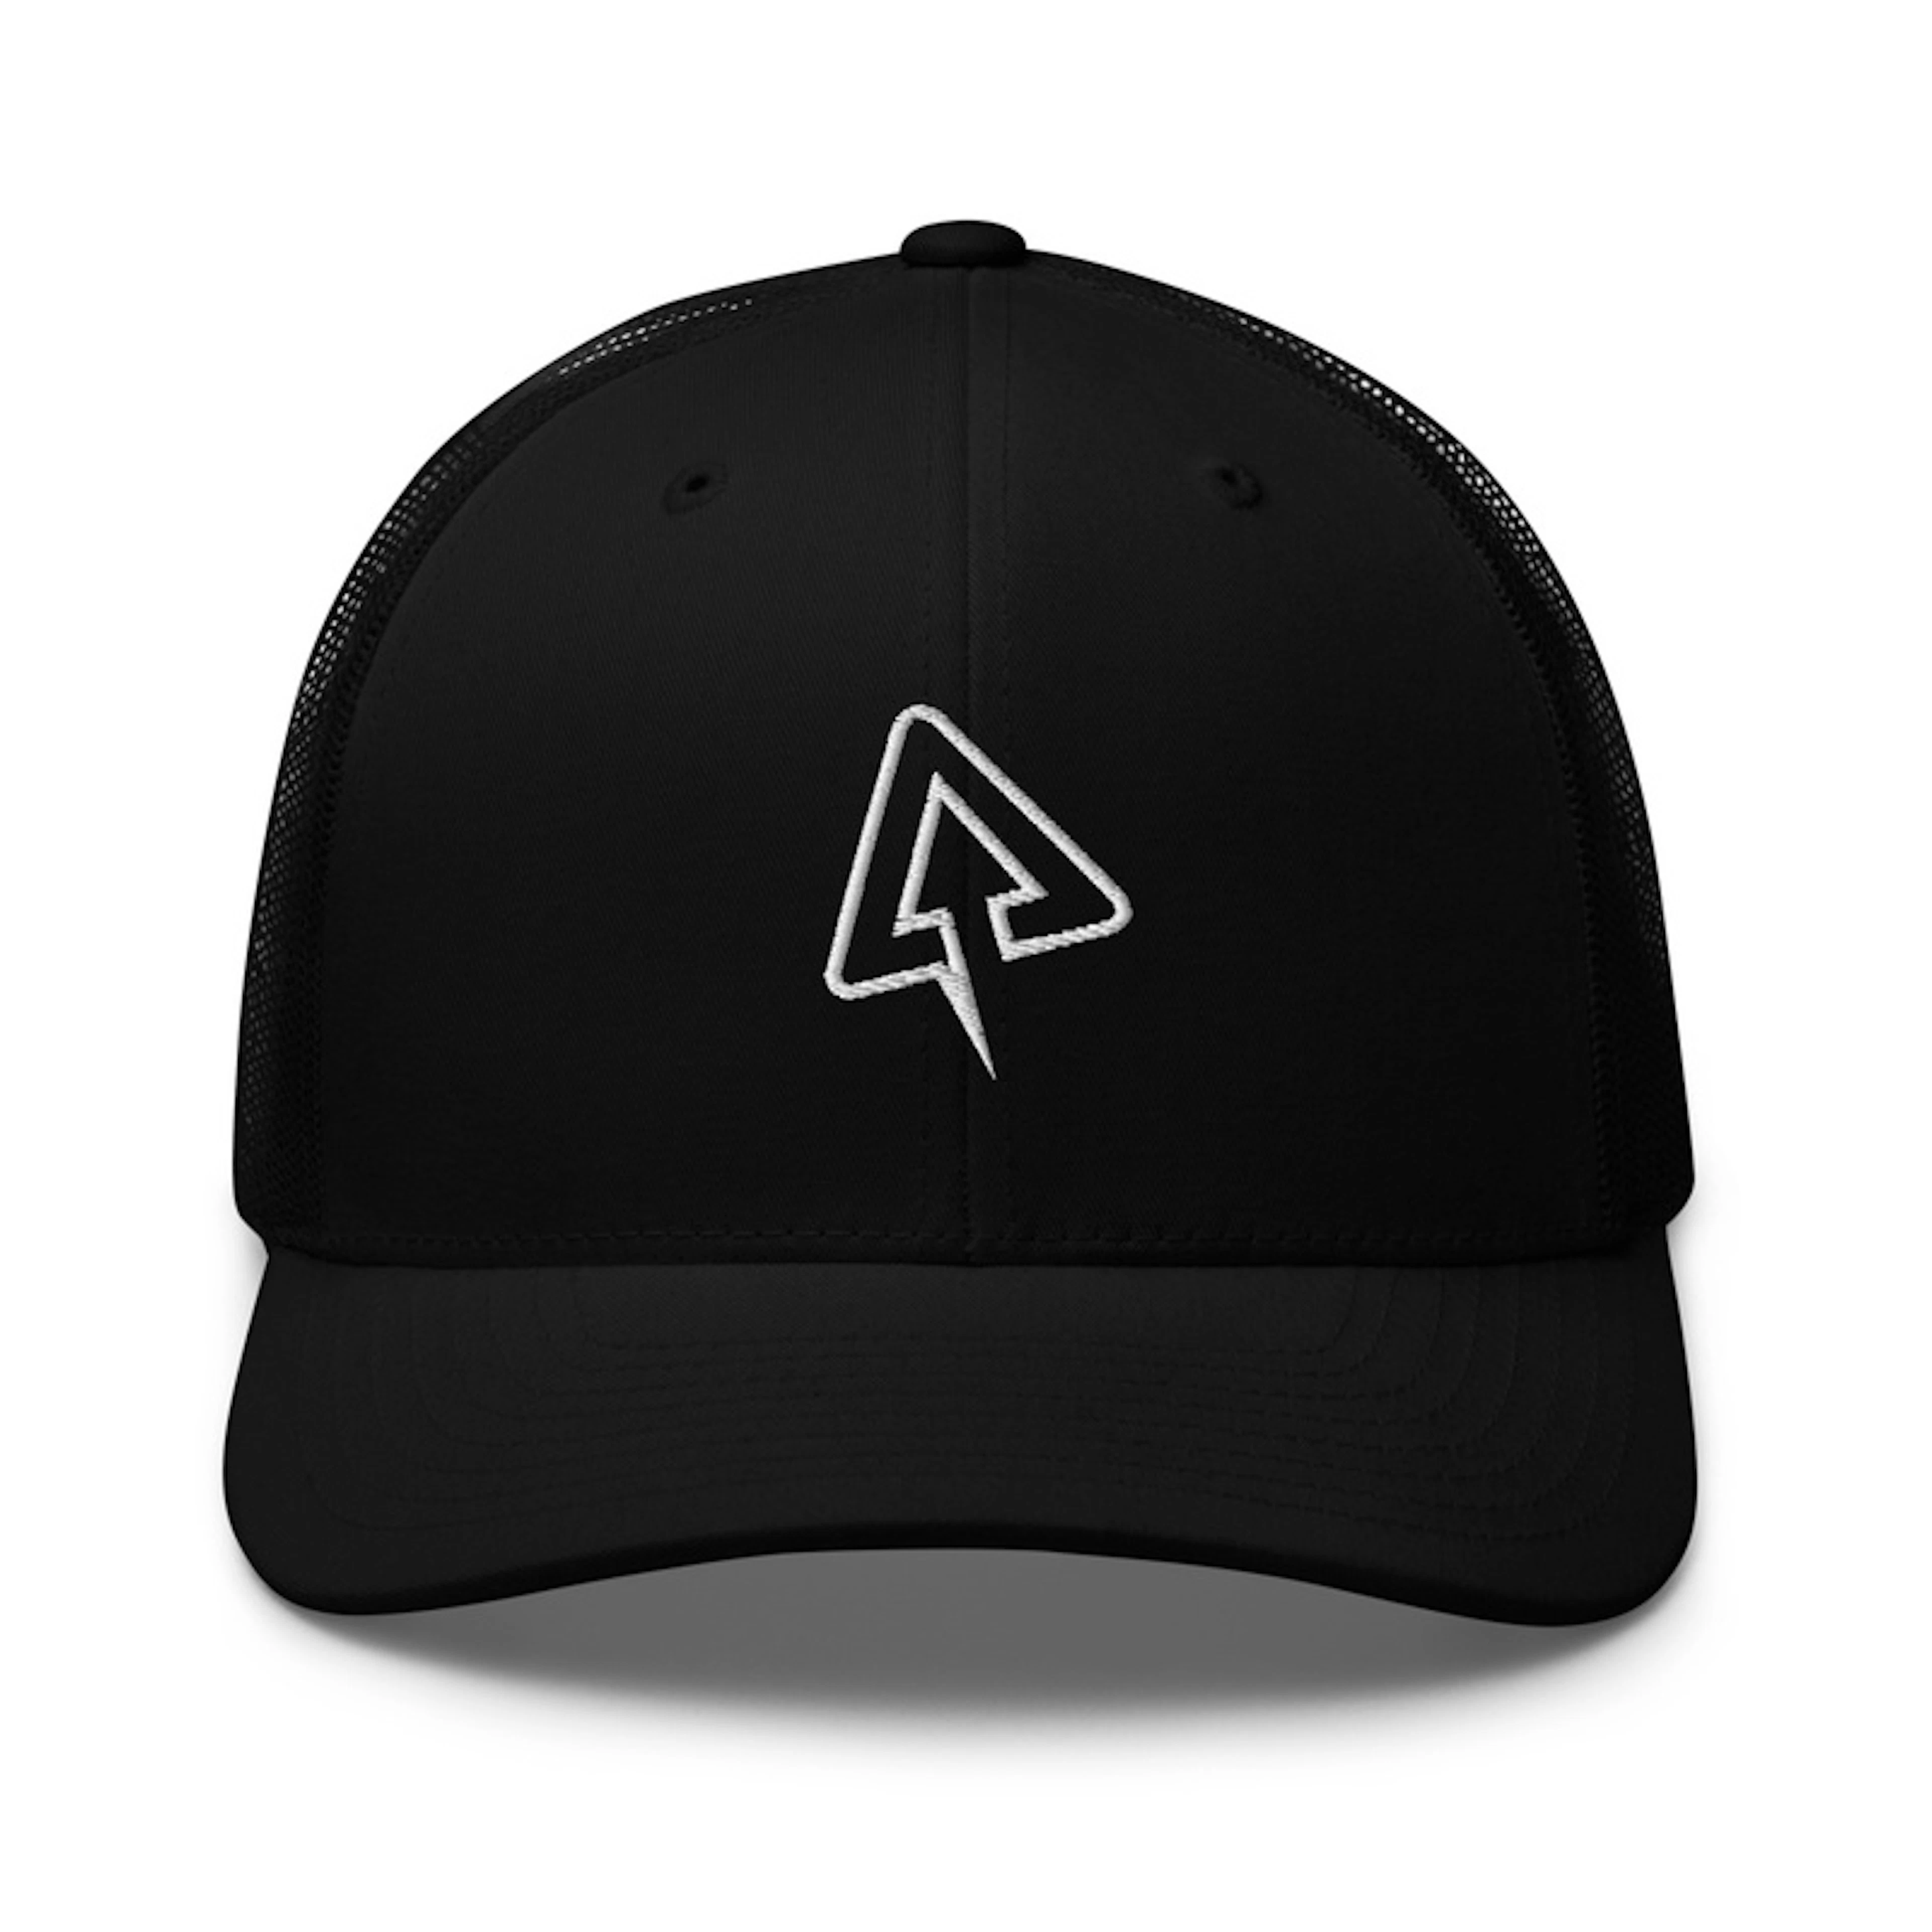 WeJustClick Hat